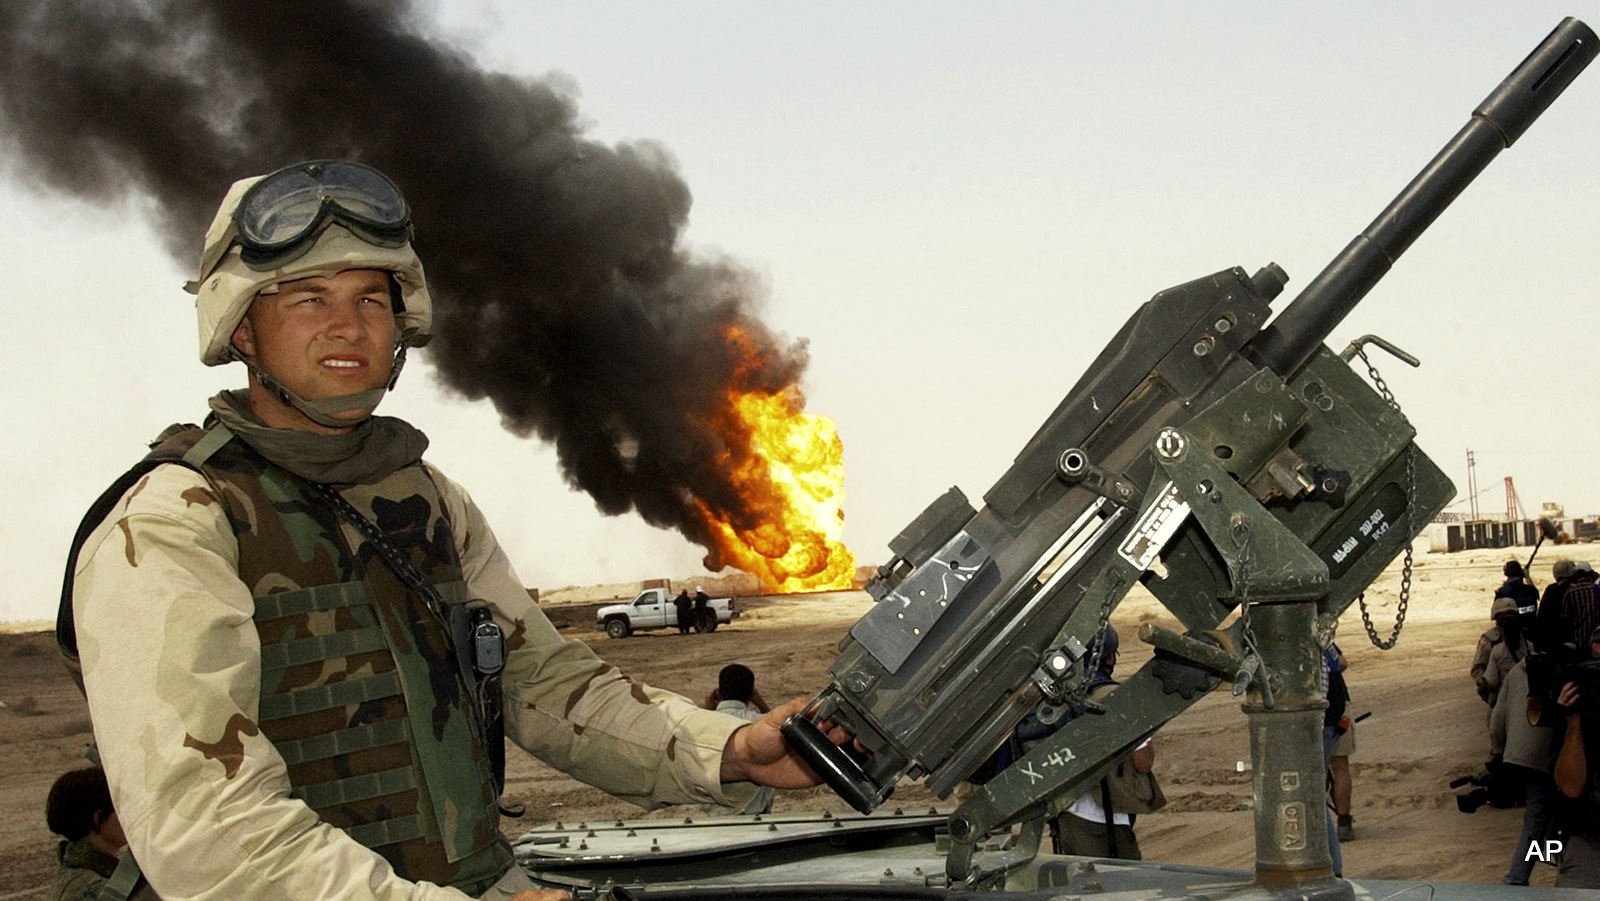 In this April 1, 2003 file photo, a U.S. soldier stands guard on top of a humvee as oil workers work on oil well fires at Rumaila oil field, southern Iraq.